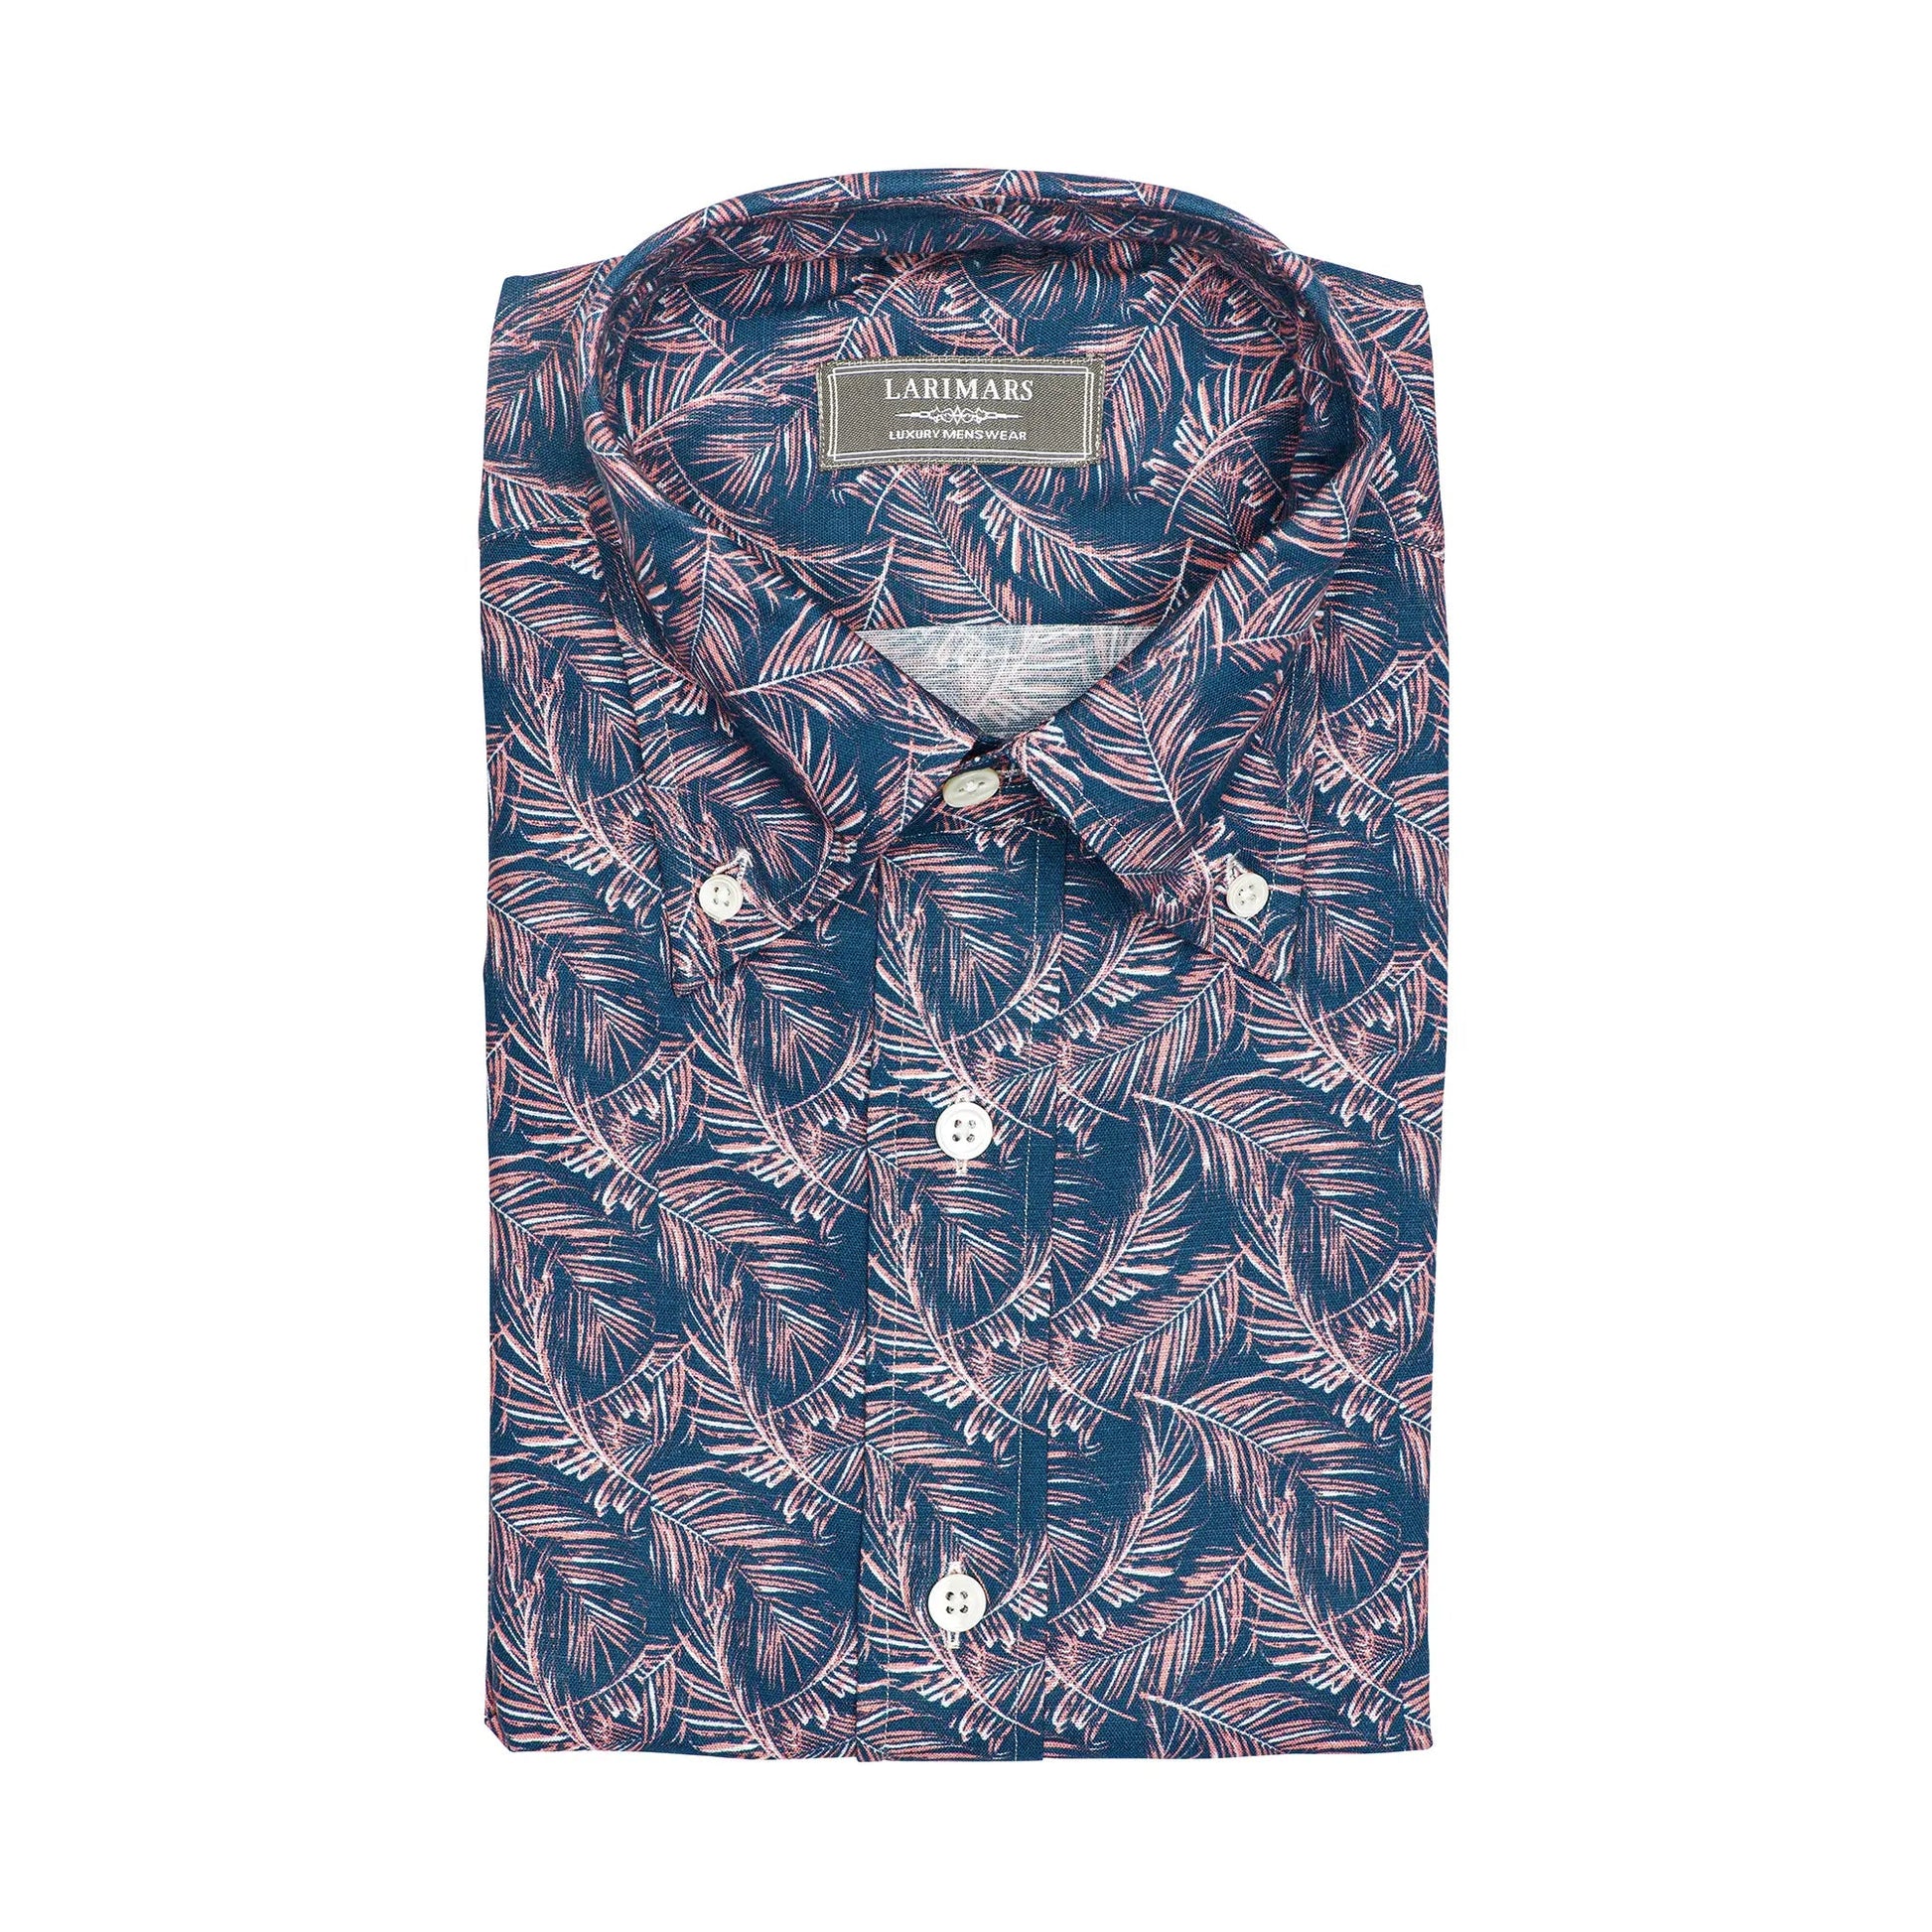 Cotton Linen Leaf Print - Larimars Clothing Men's Formal and casual wear shirts